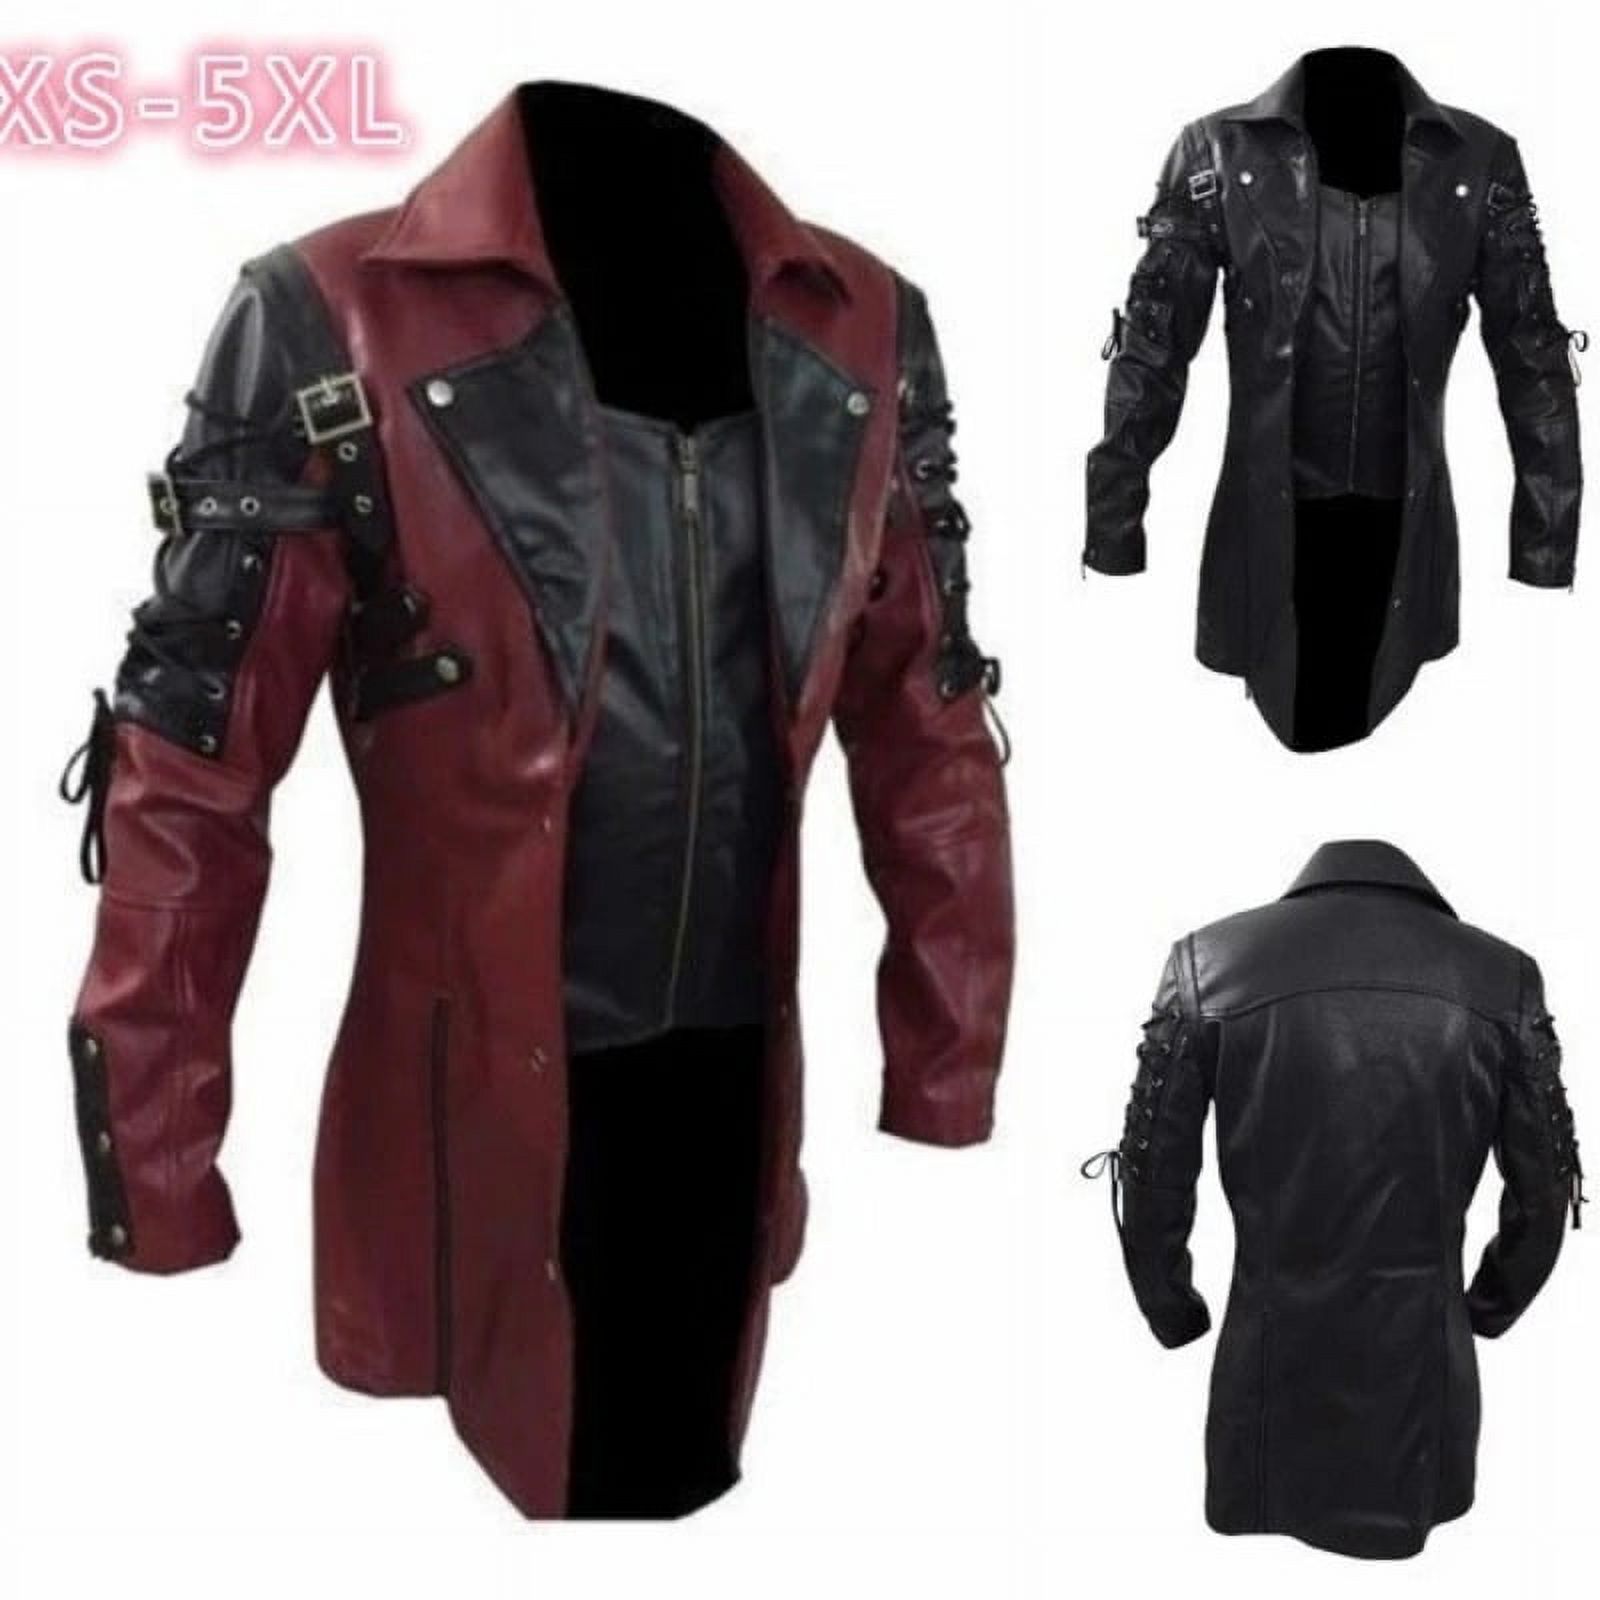 New Steampunk Men's Gothic Trench Coat Leather Jacket Punk Style Biker ...